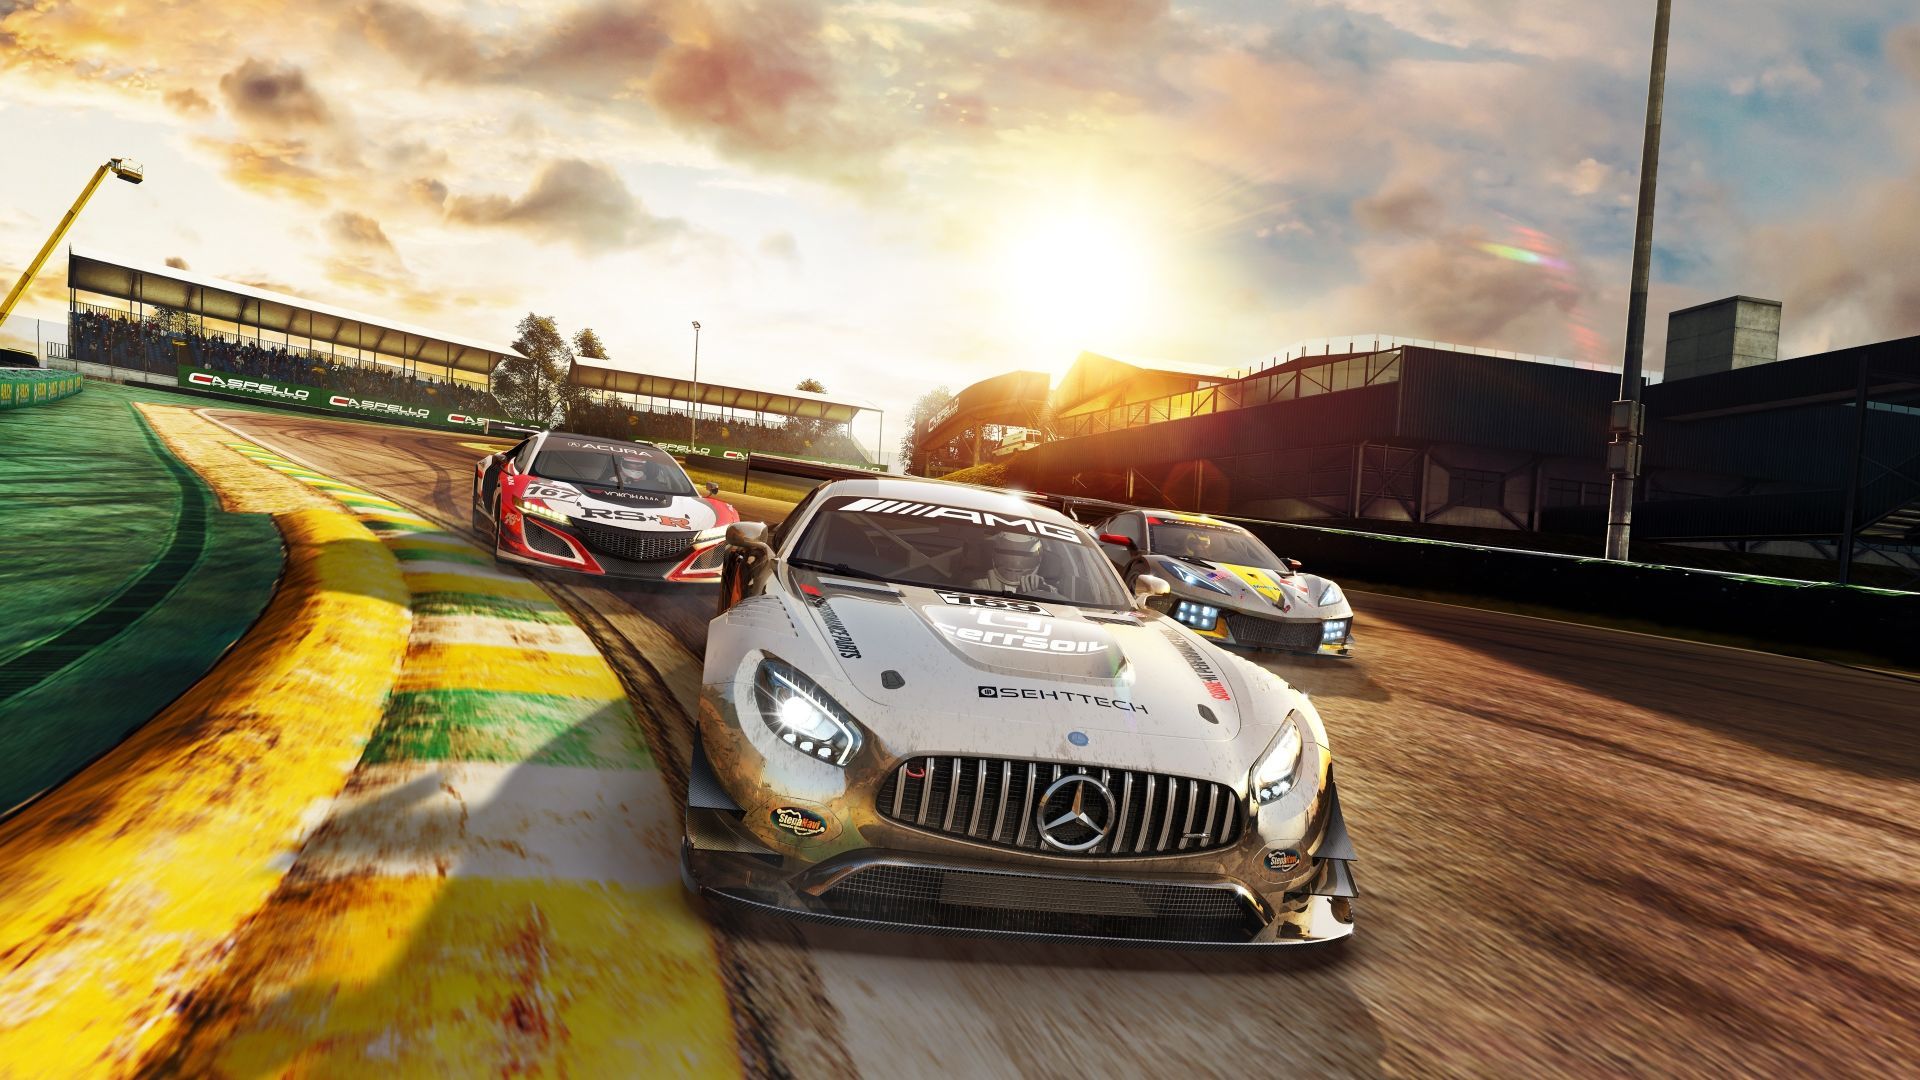 Project cars video game, car race wallpaper, HD image, picture, background, 5f56a2